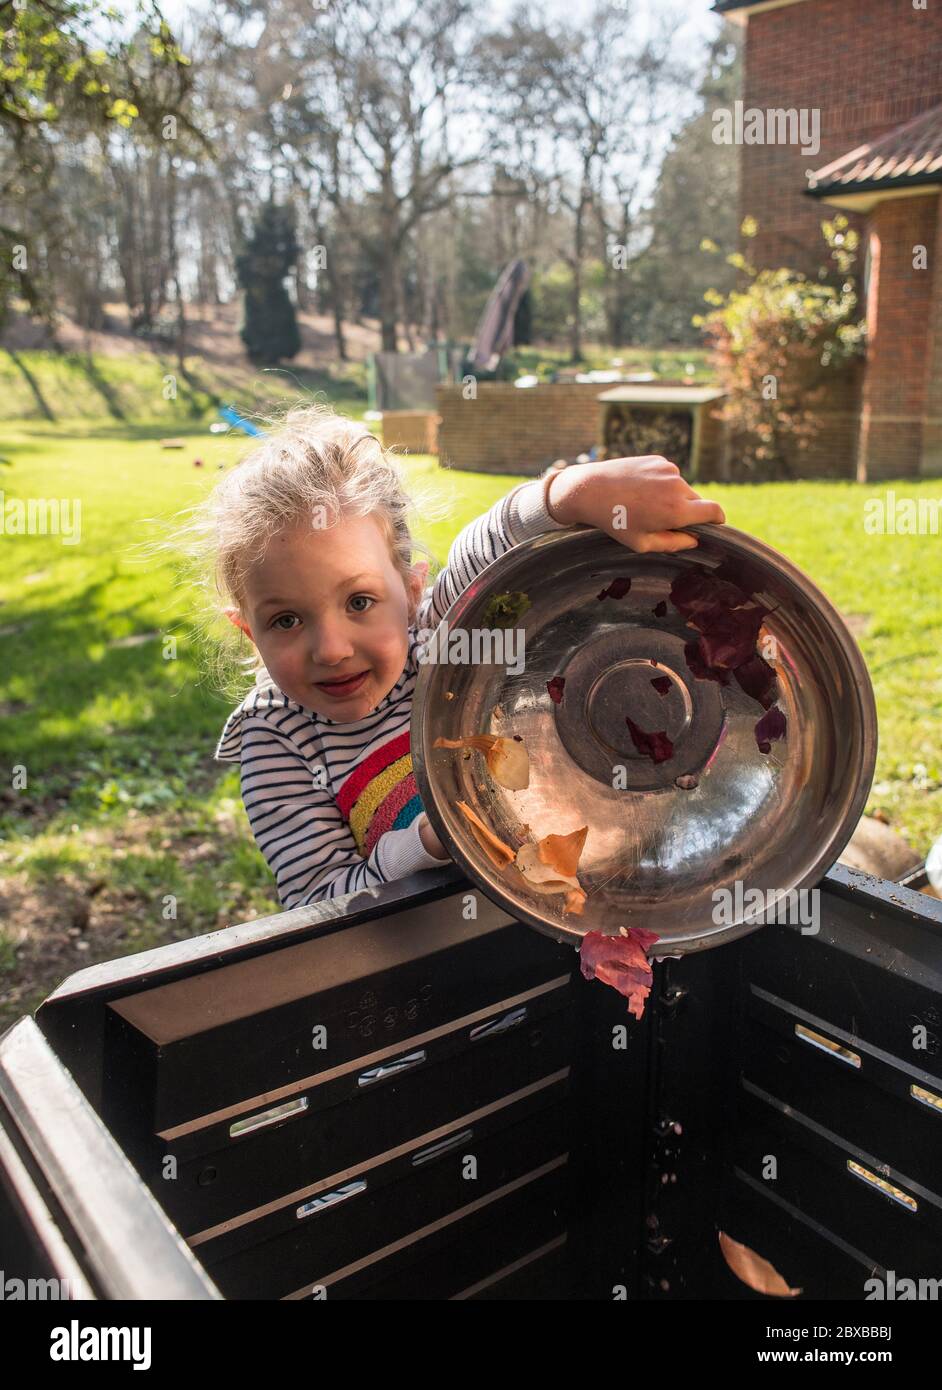 Corona composting, 4 year old pre-school girl emptying out the compost bin, getting your child interesting in gardening. Corona lockdown gardening Stock Photo